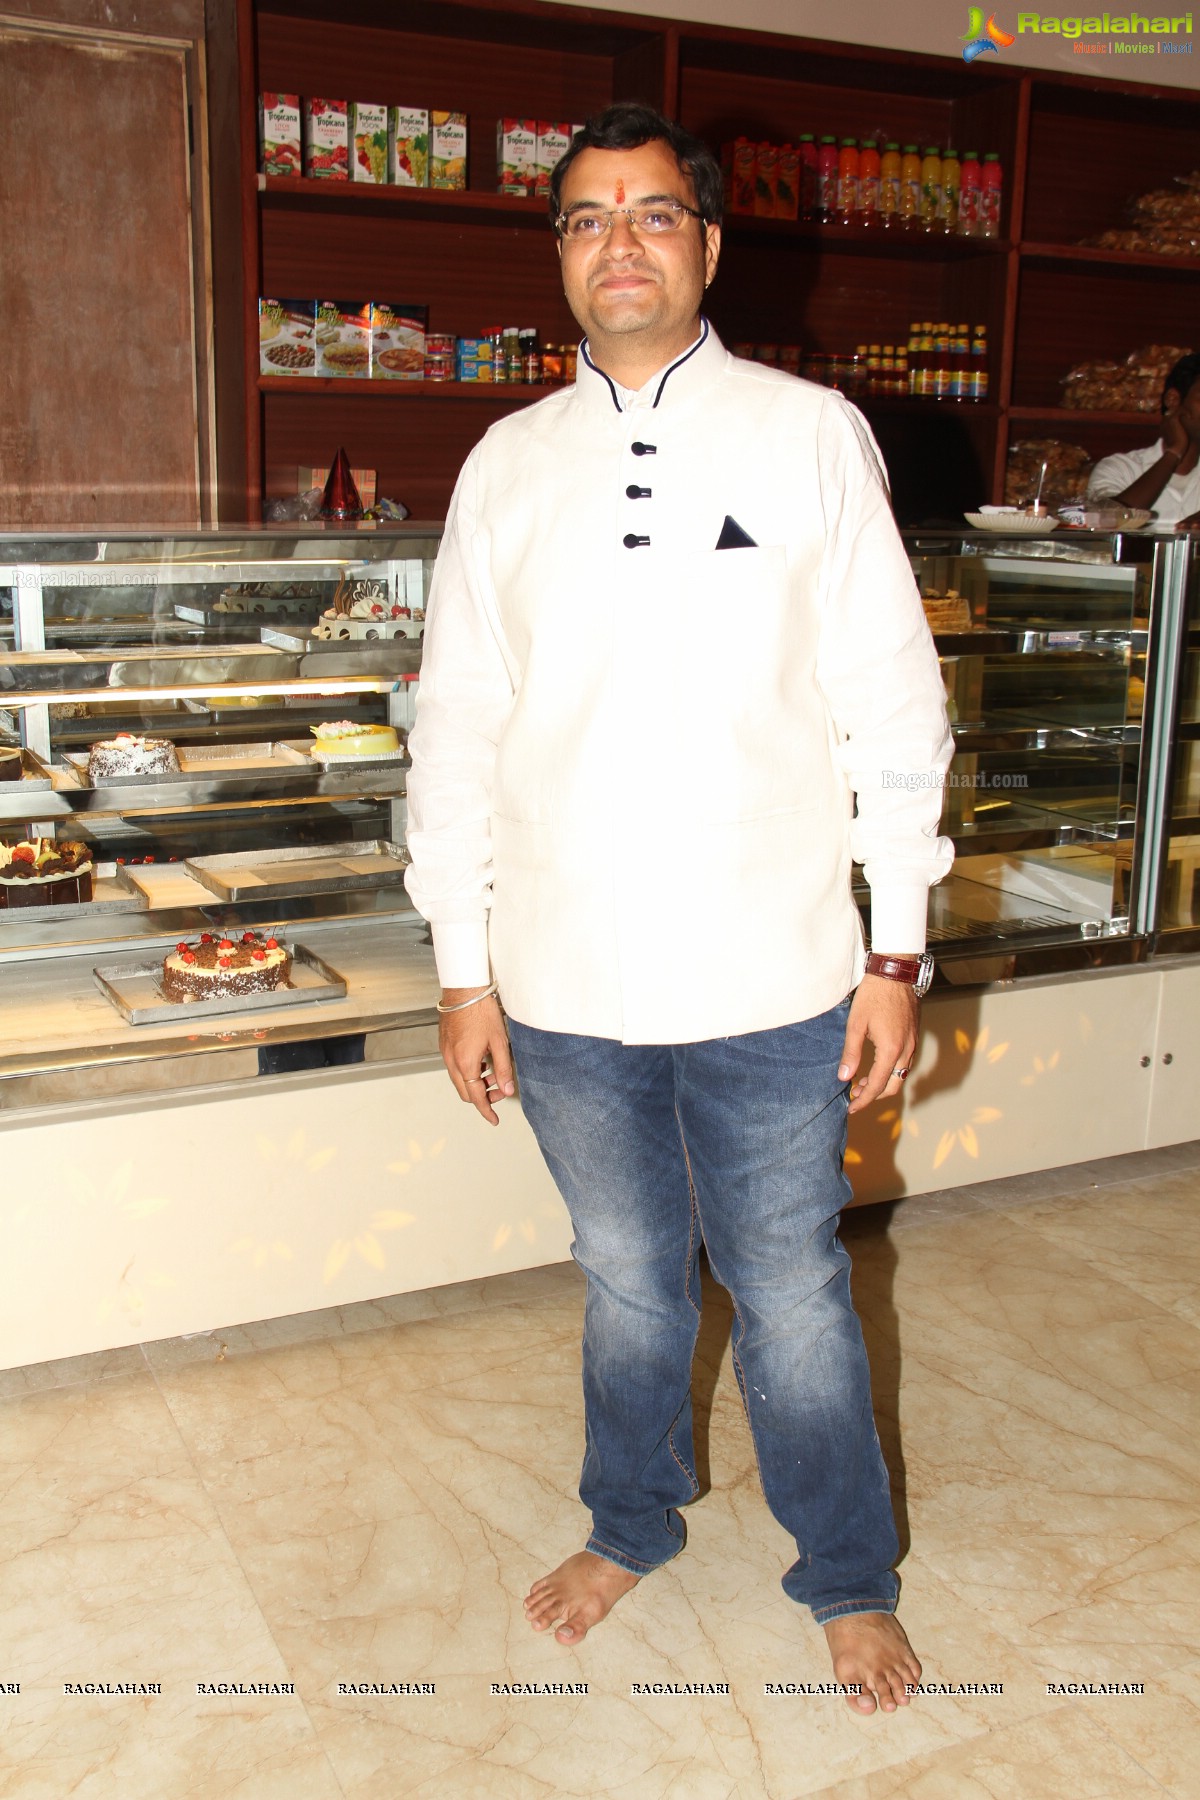 Milano Bakers Launch